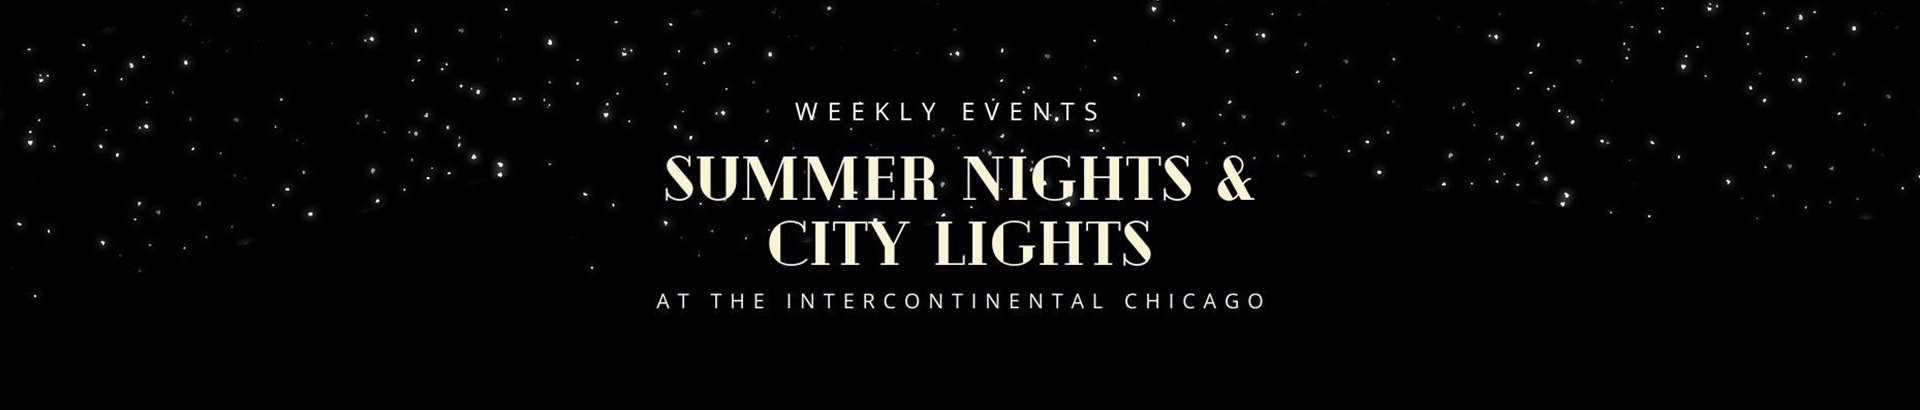 summer nights and city lights at the intercontinental chicago